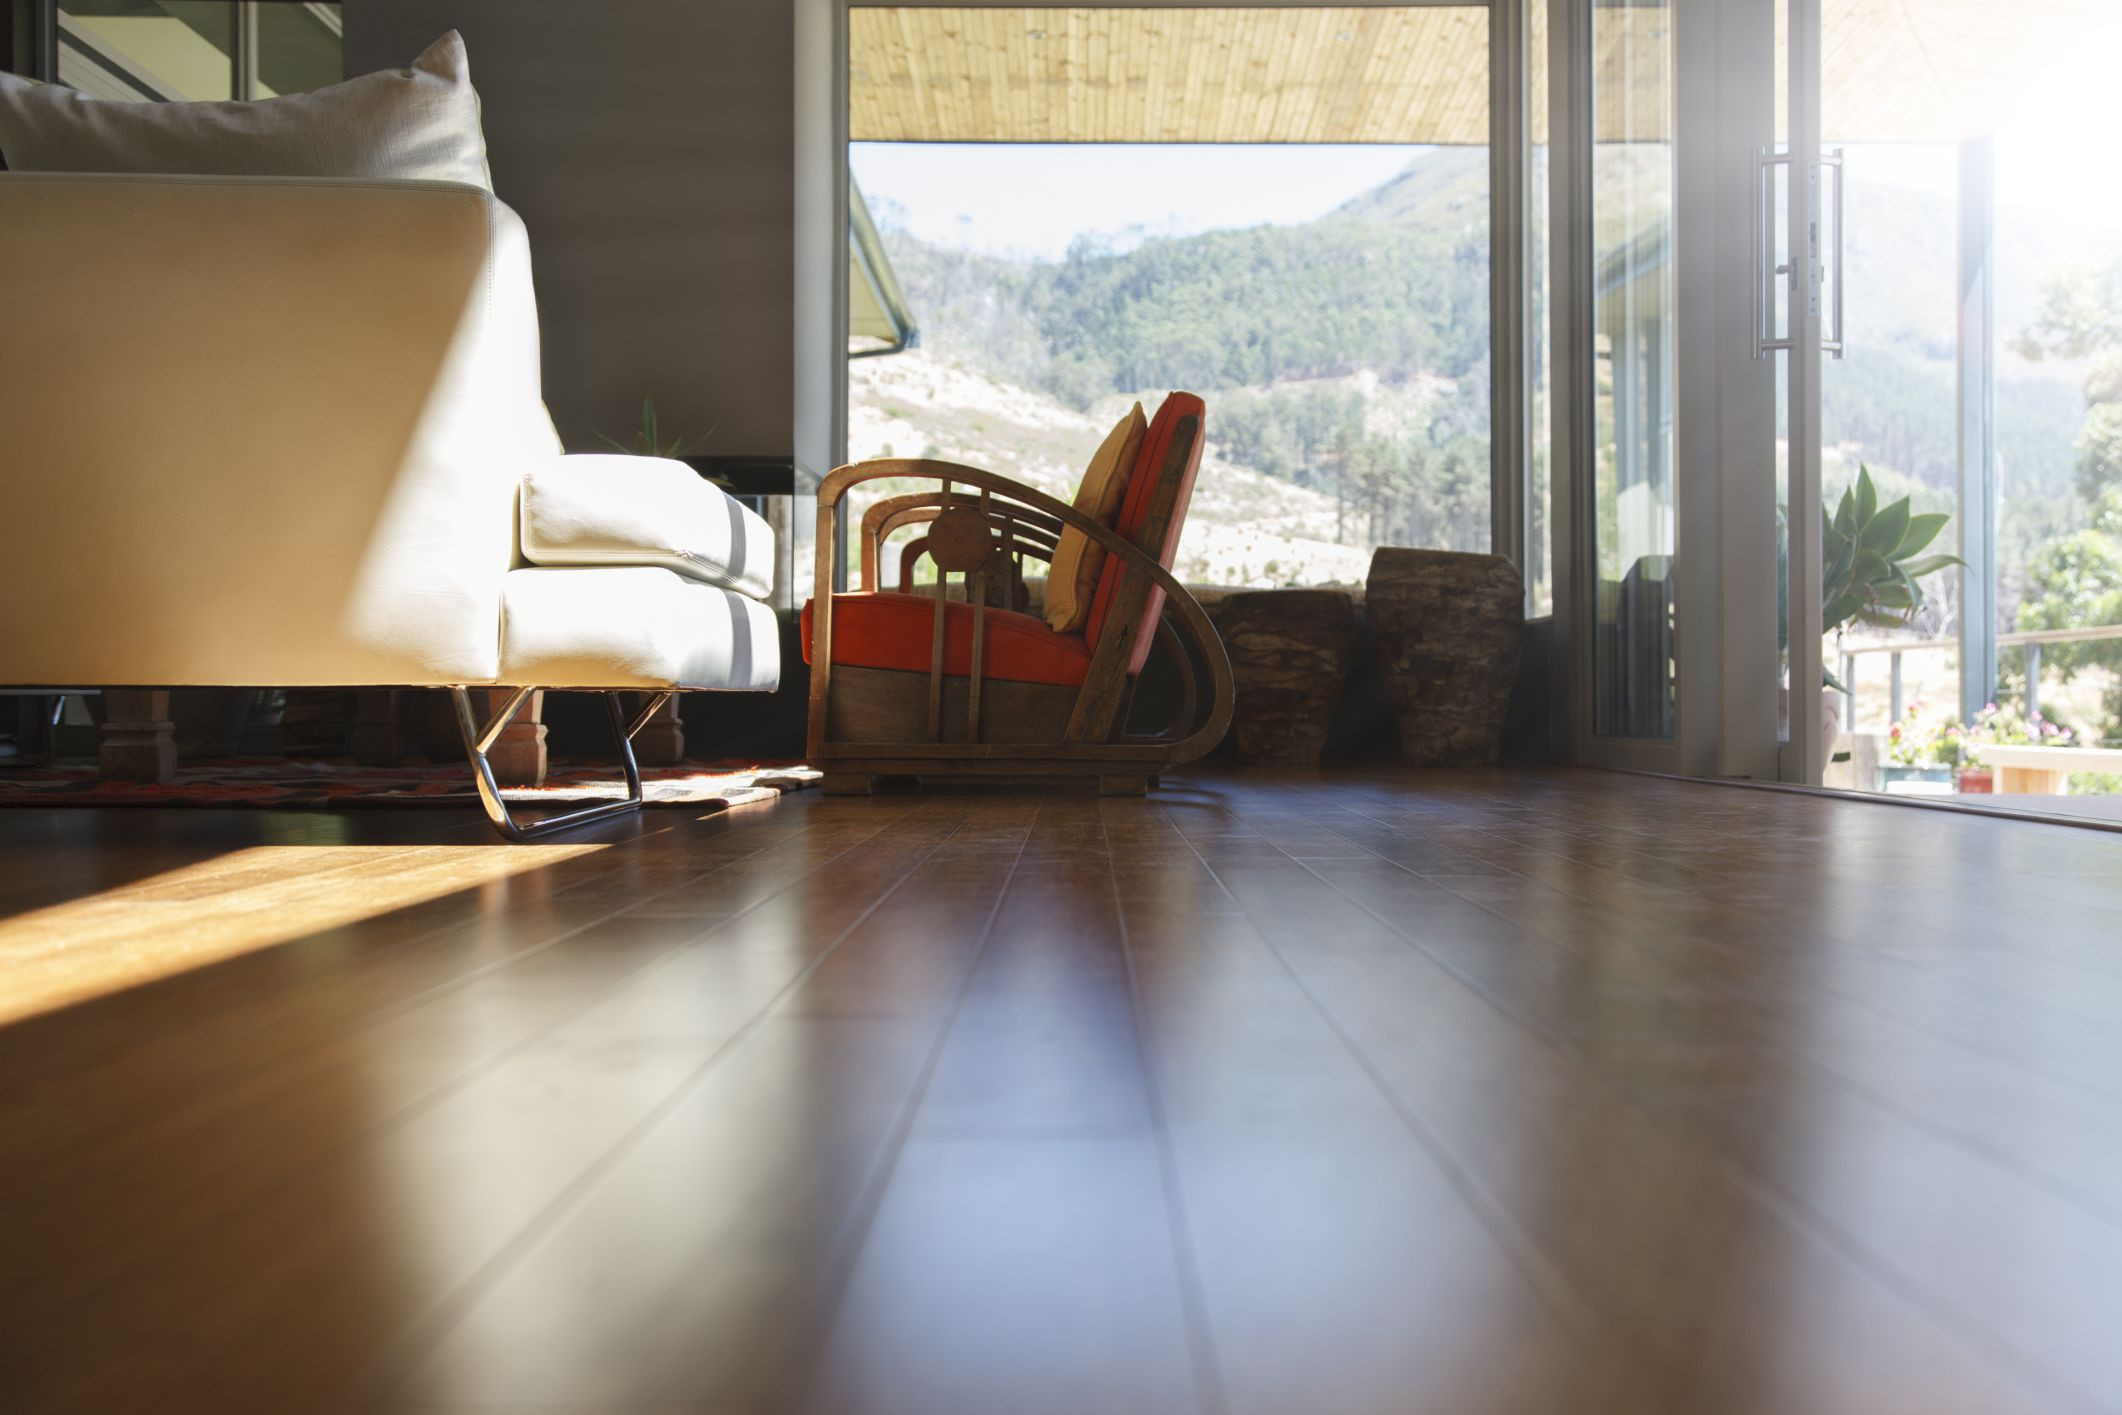 somerset hardwood floor cleaner of pros and cons of bellawood flooring from lumber liquidators pertaining to exotic hardwood flooring 525439899 56a49d3a3df78cf77283453d